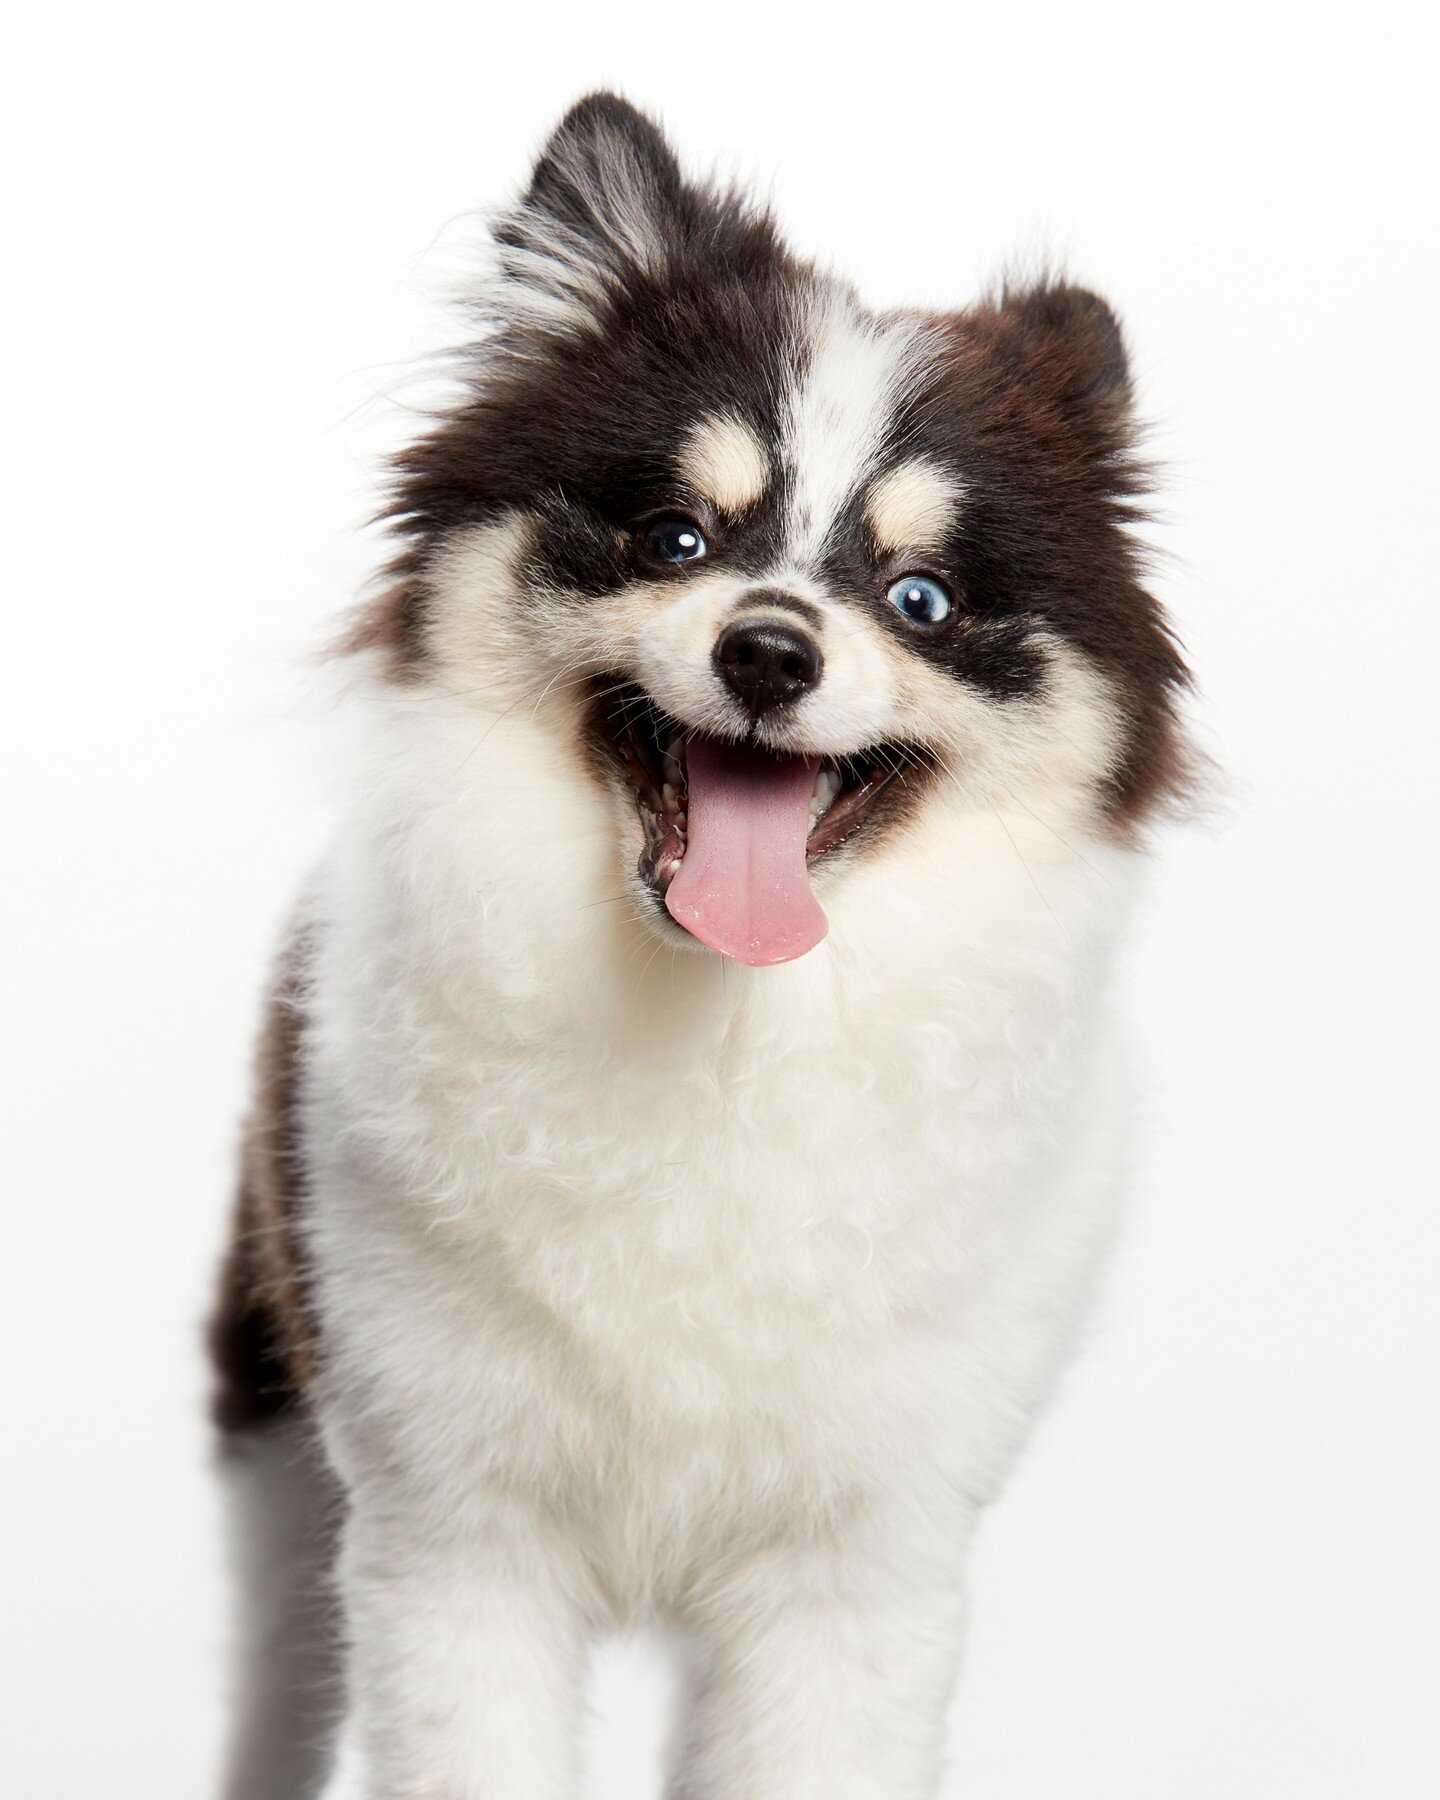 Muffin the Pomsky

Pomeranian Huskies are a cross between a Pomeranian and a Siberian Husky, and they typically weigh between 10 and 25 pounds. Pomskies are known for their playful personalities and their love of attention. They are great family pets